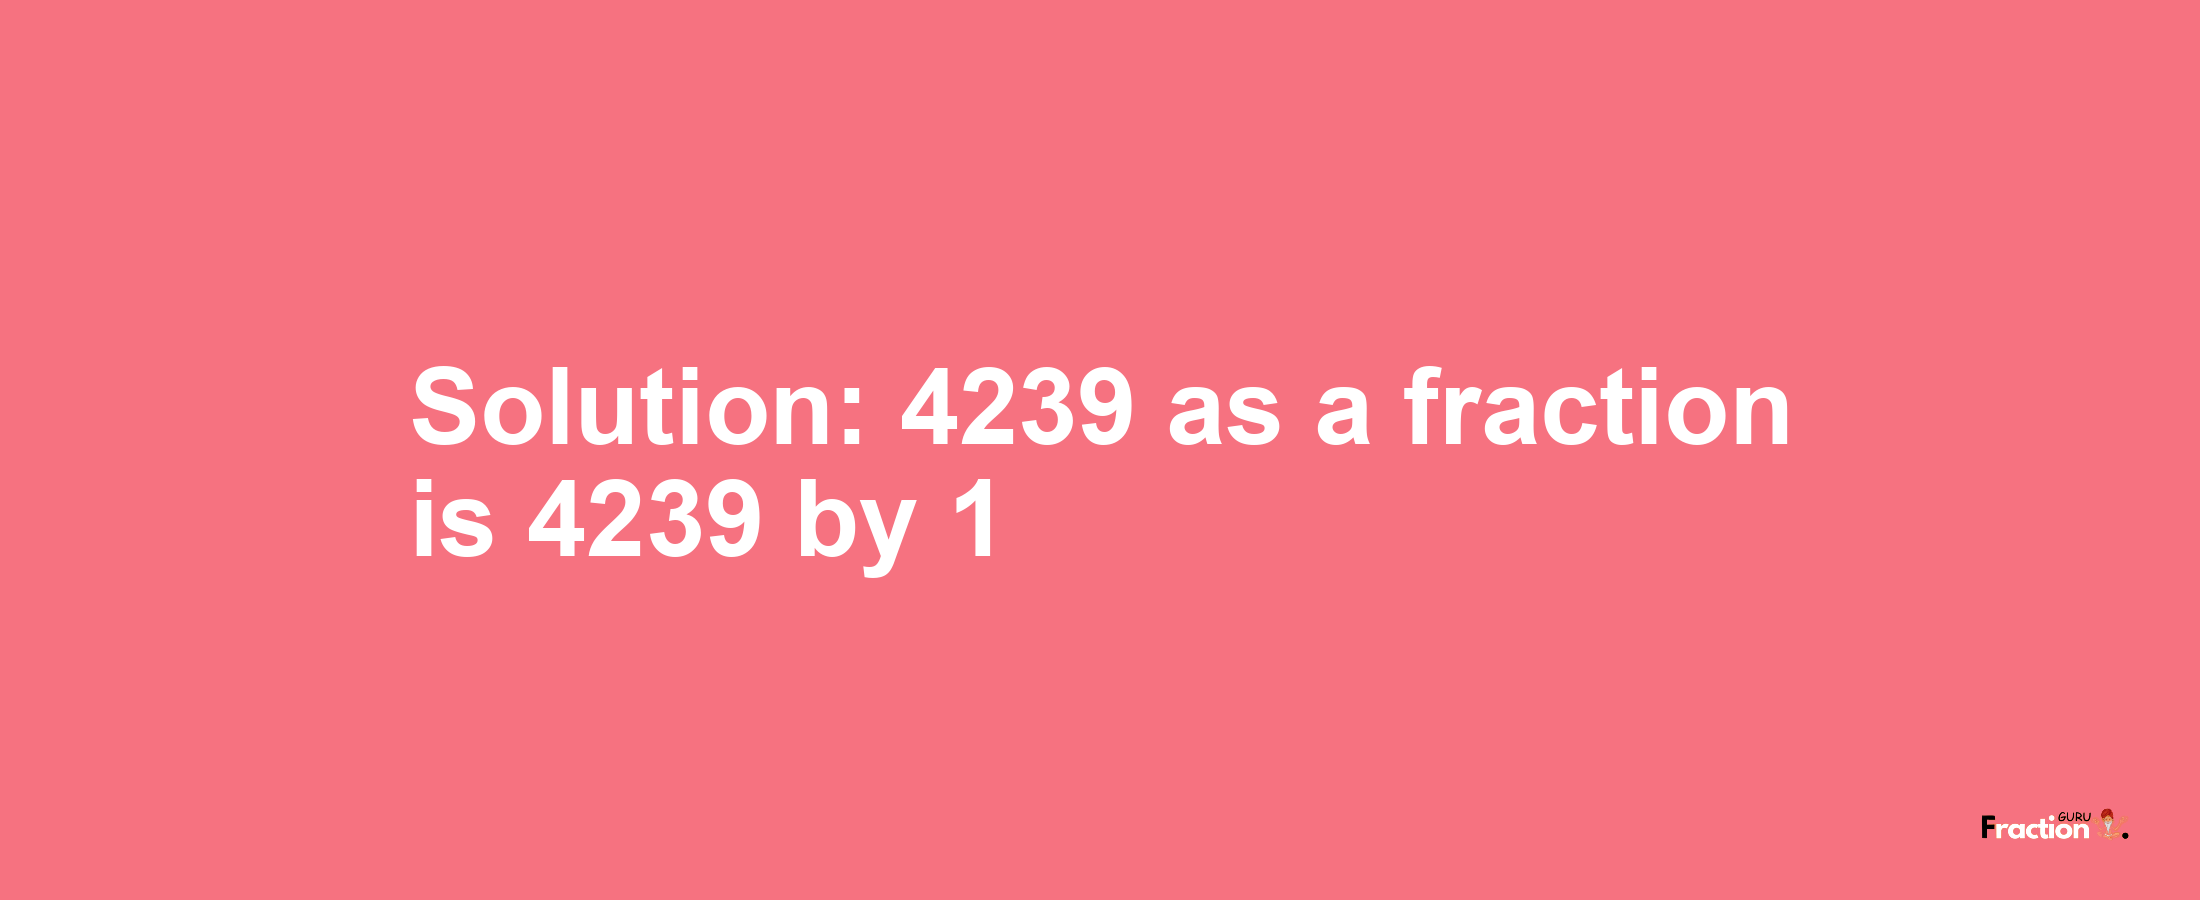 Solution:4239 as a fraction is 4239/1